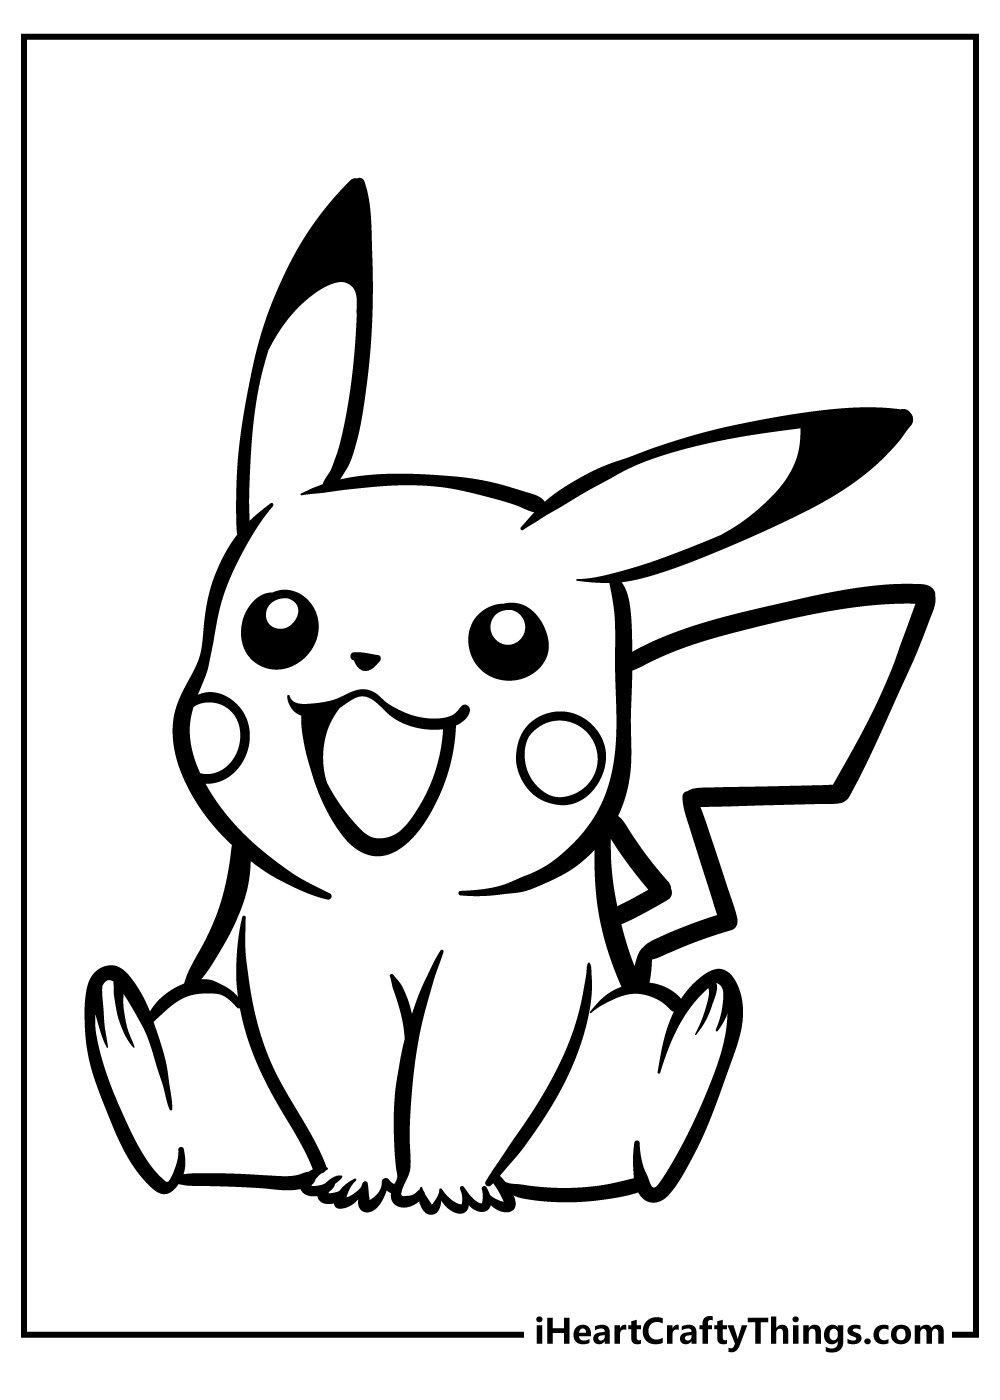 Pokemon coloring pages free printables